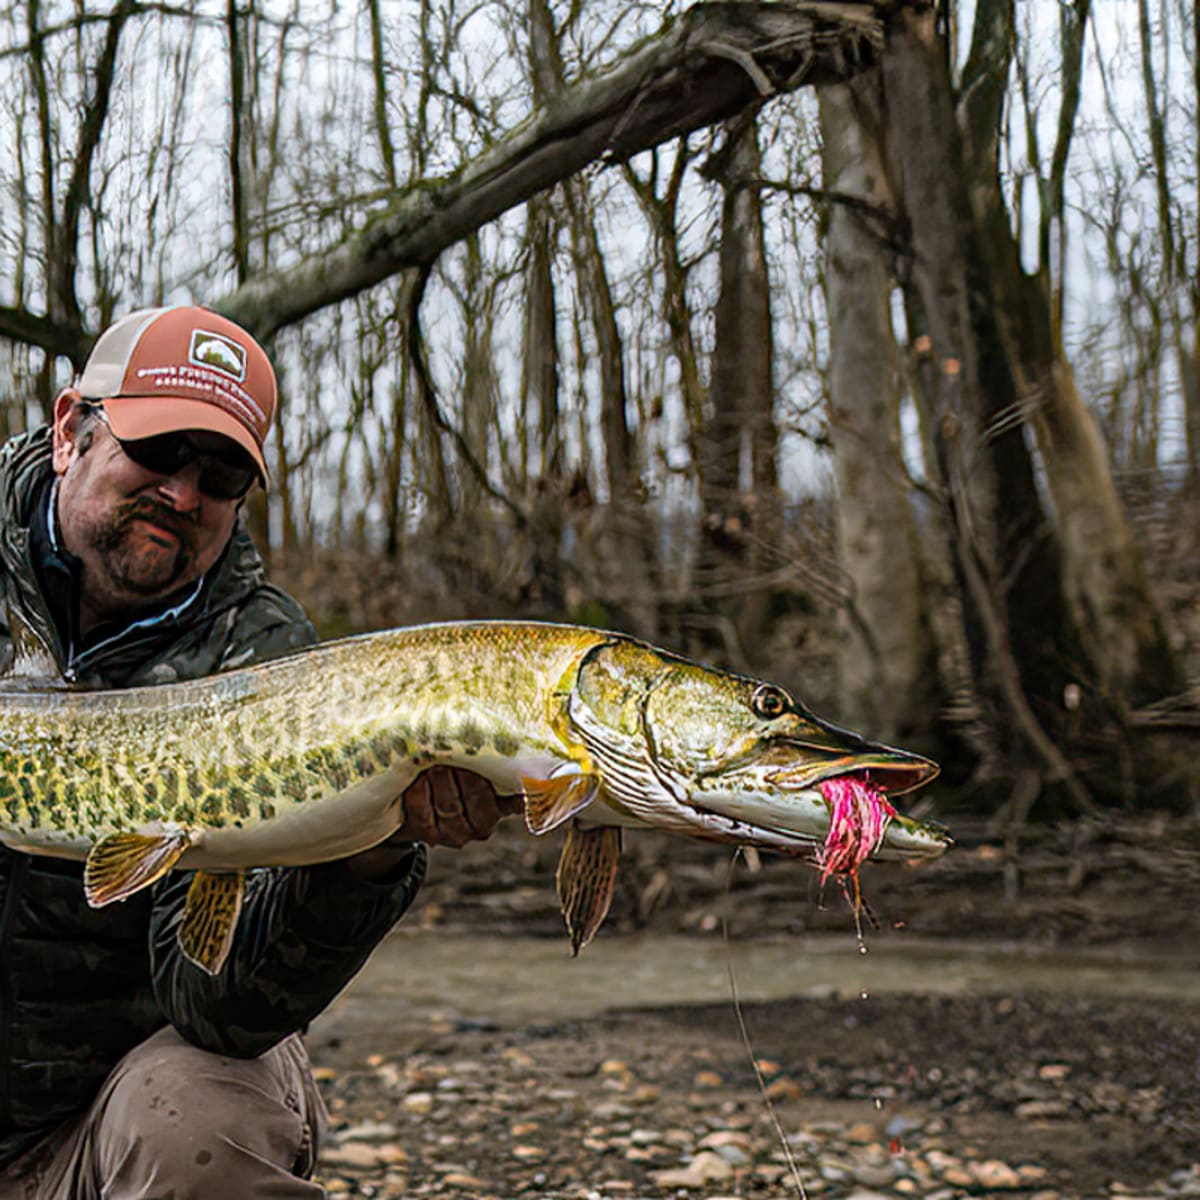 Fly Fishing for Muskie - Challenging, Intense, and Worth the Effort